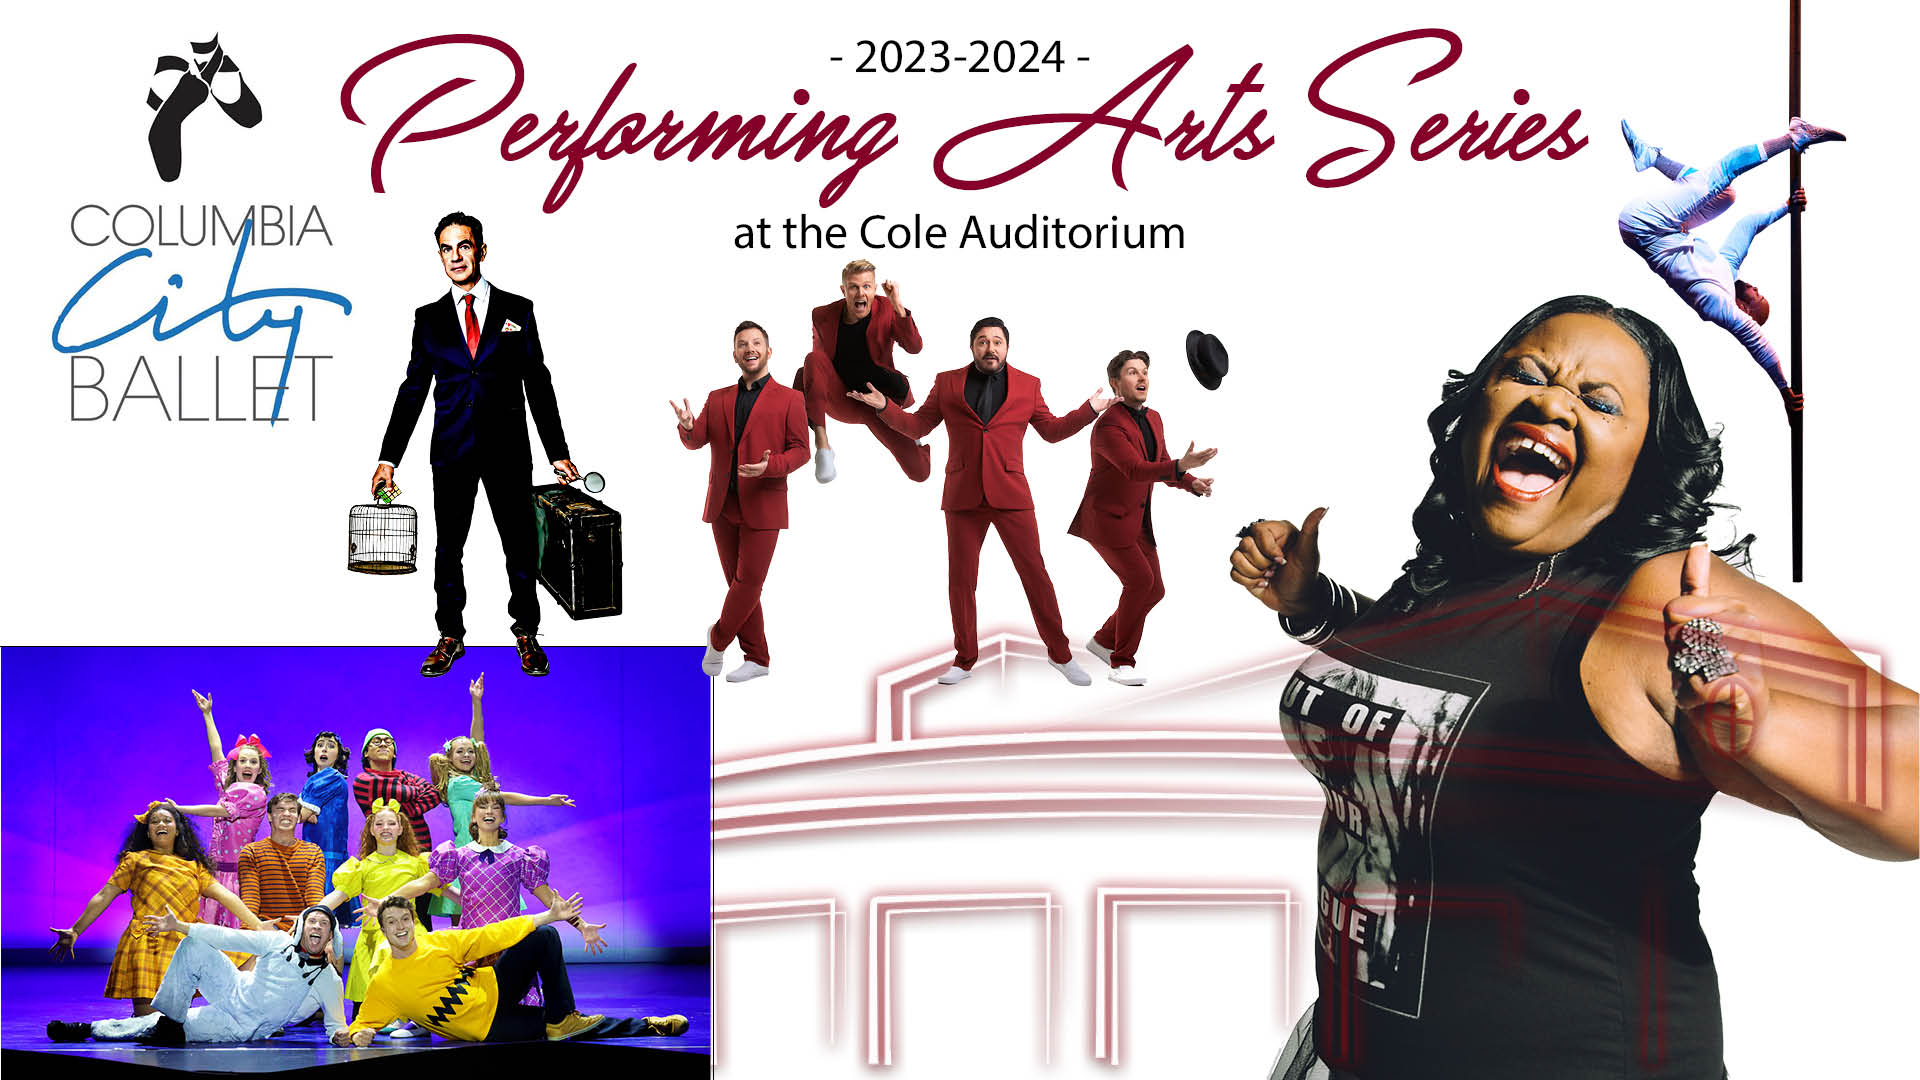 Performing Arts Series show graphic